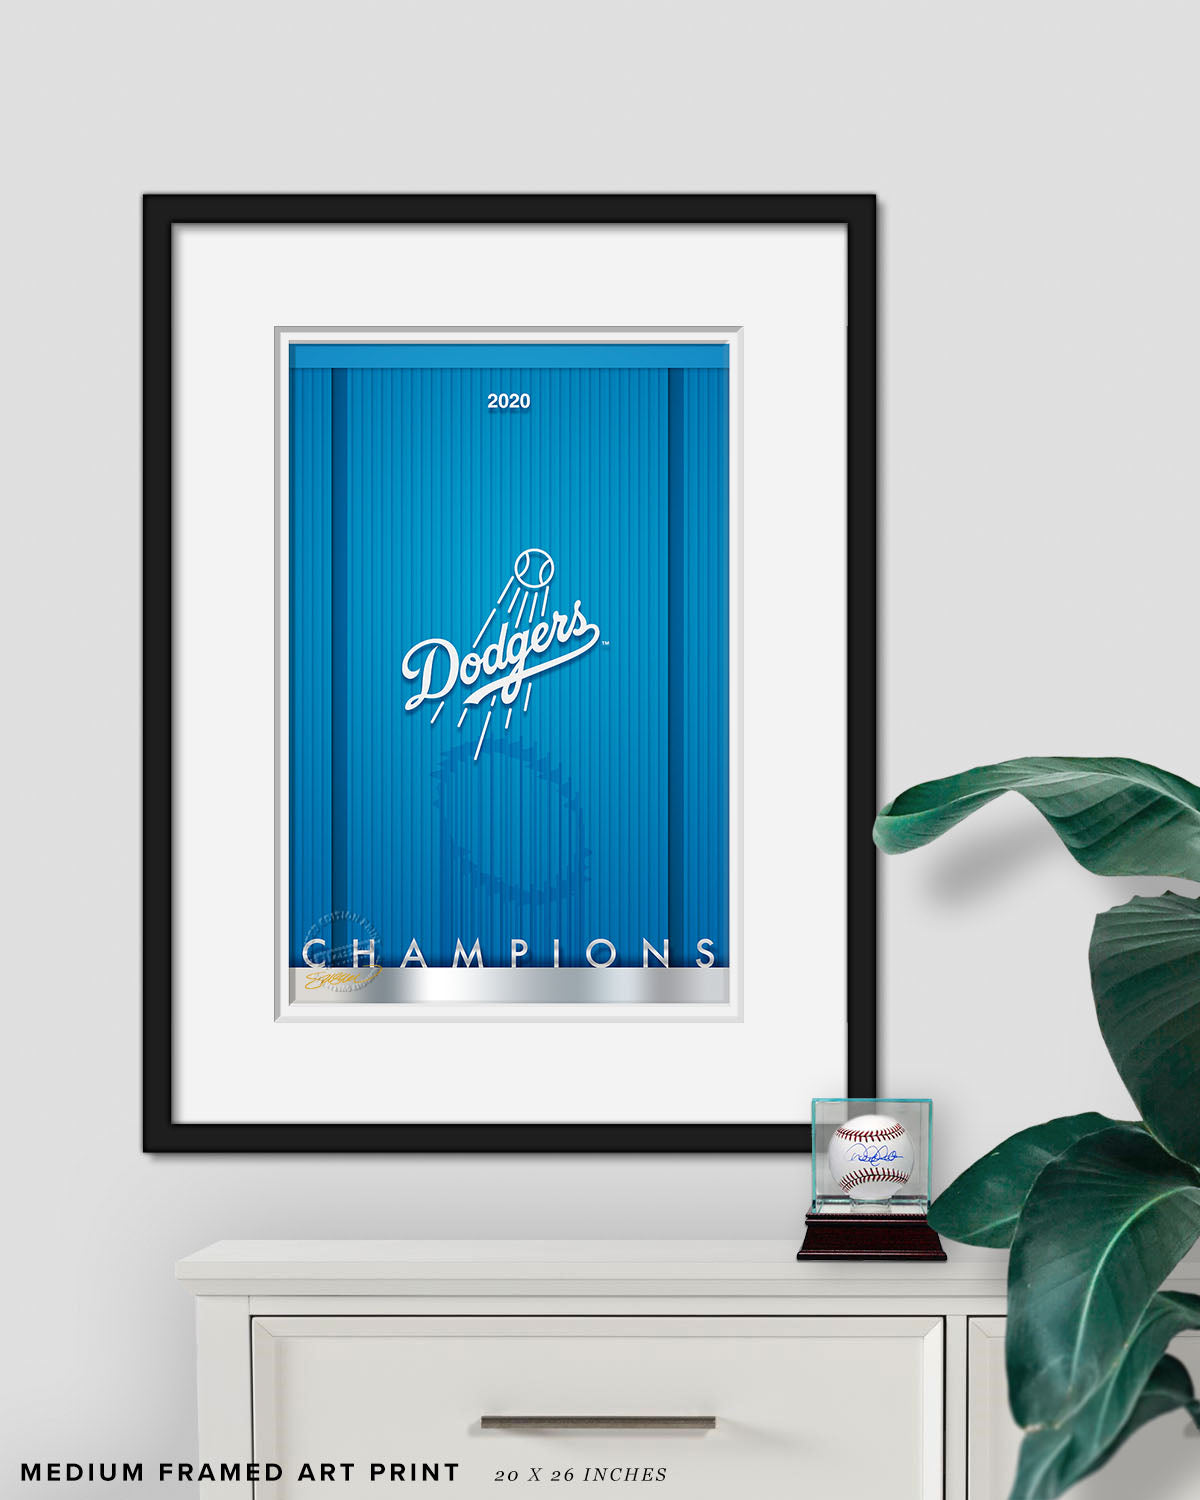 2020 MLB World Series Champions Los Angeles Dodgers Framed Wall